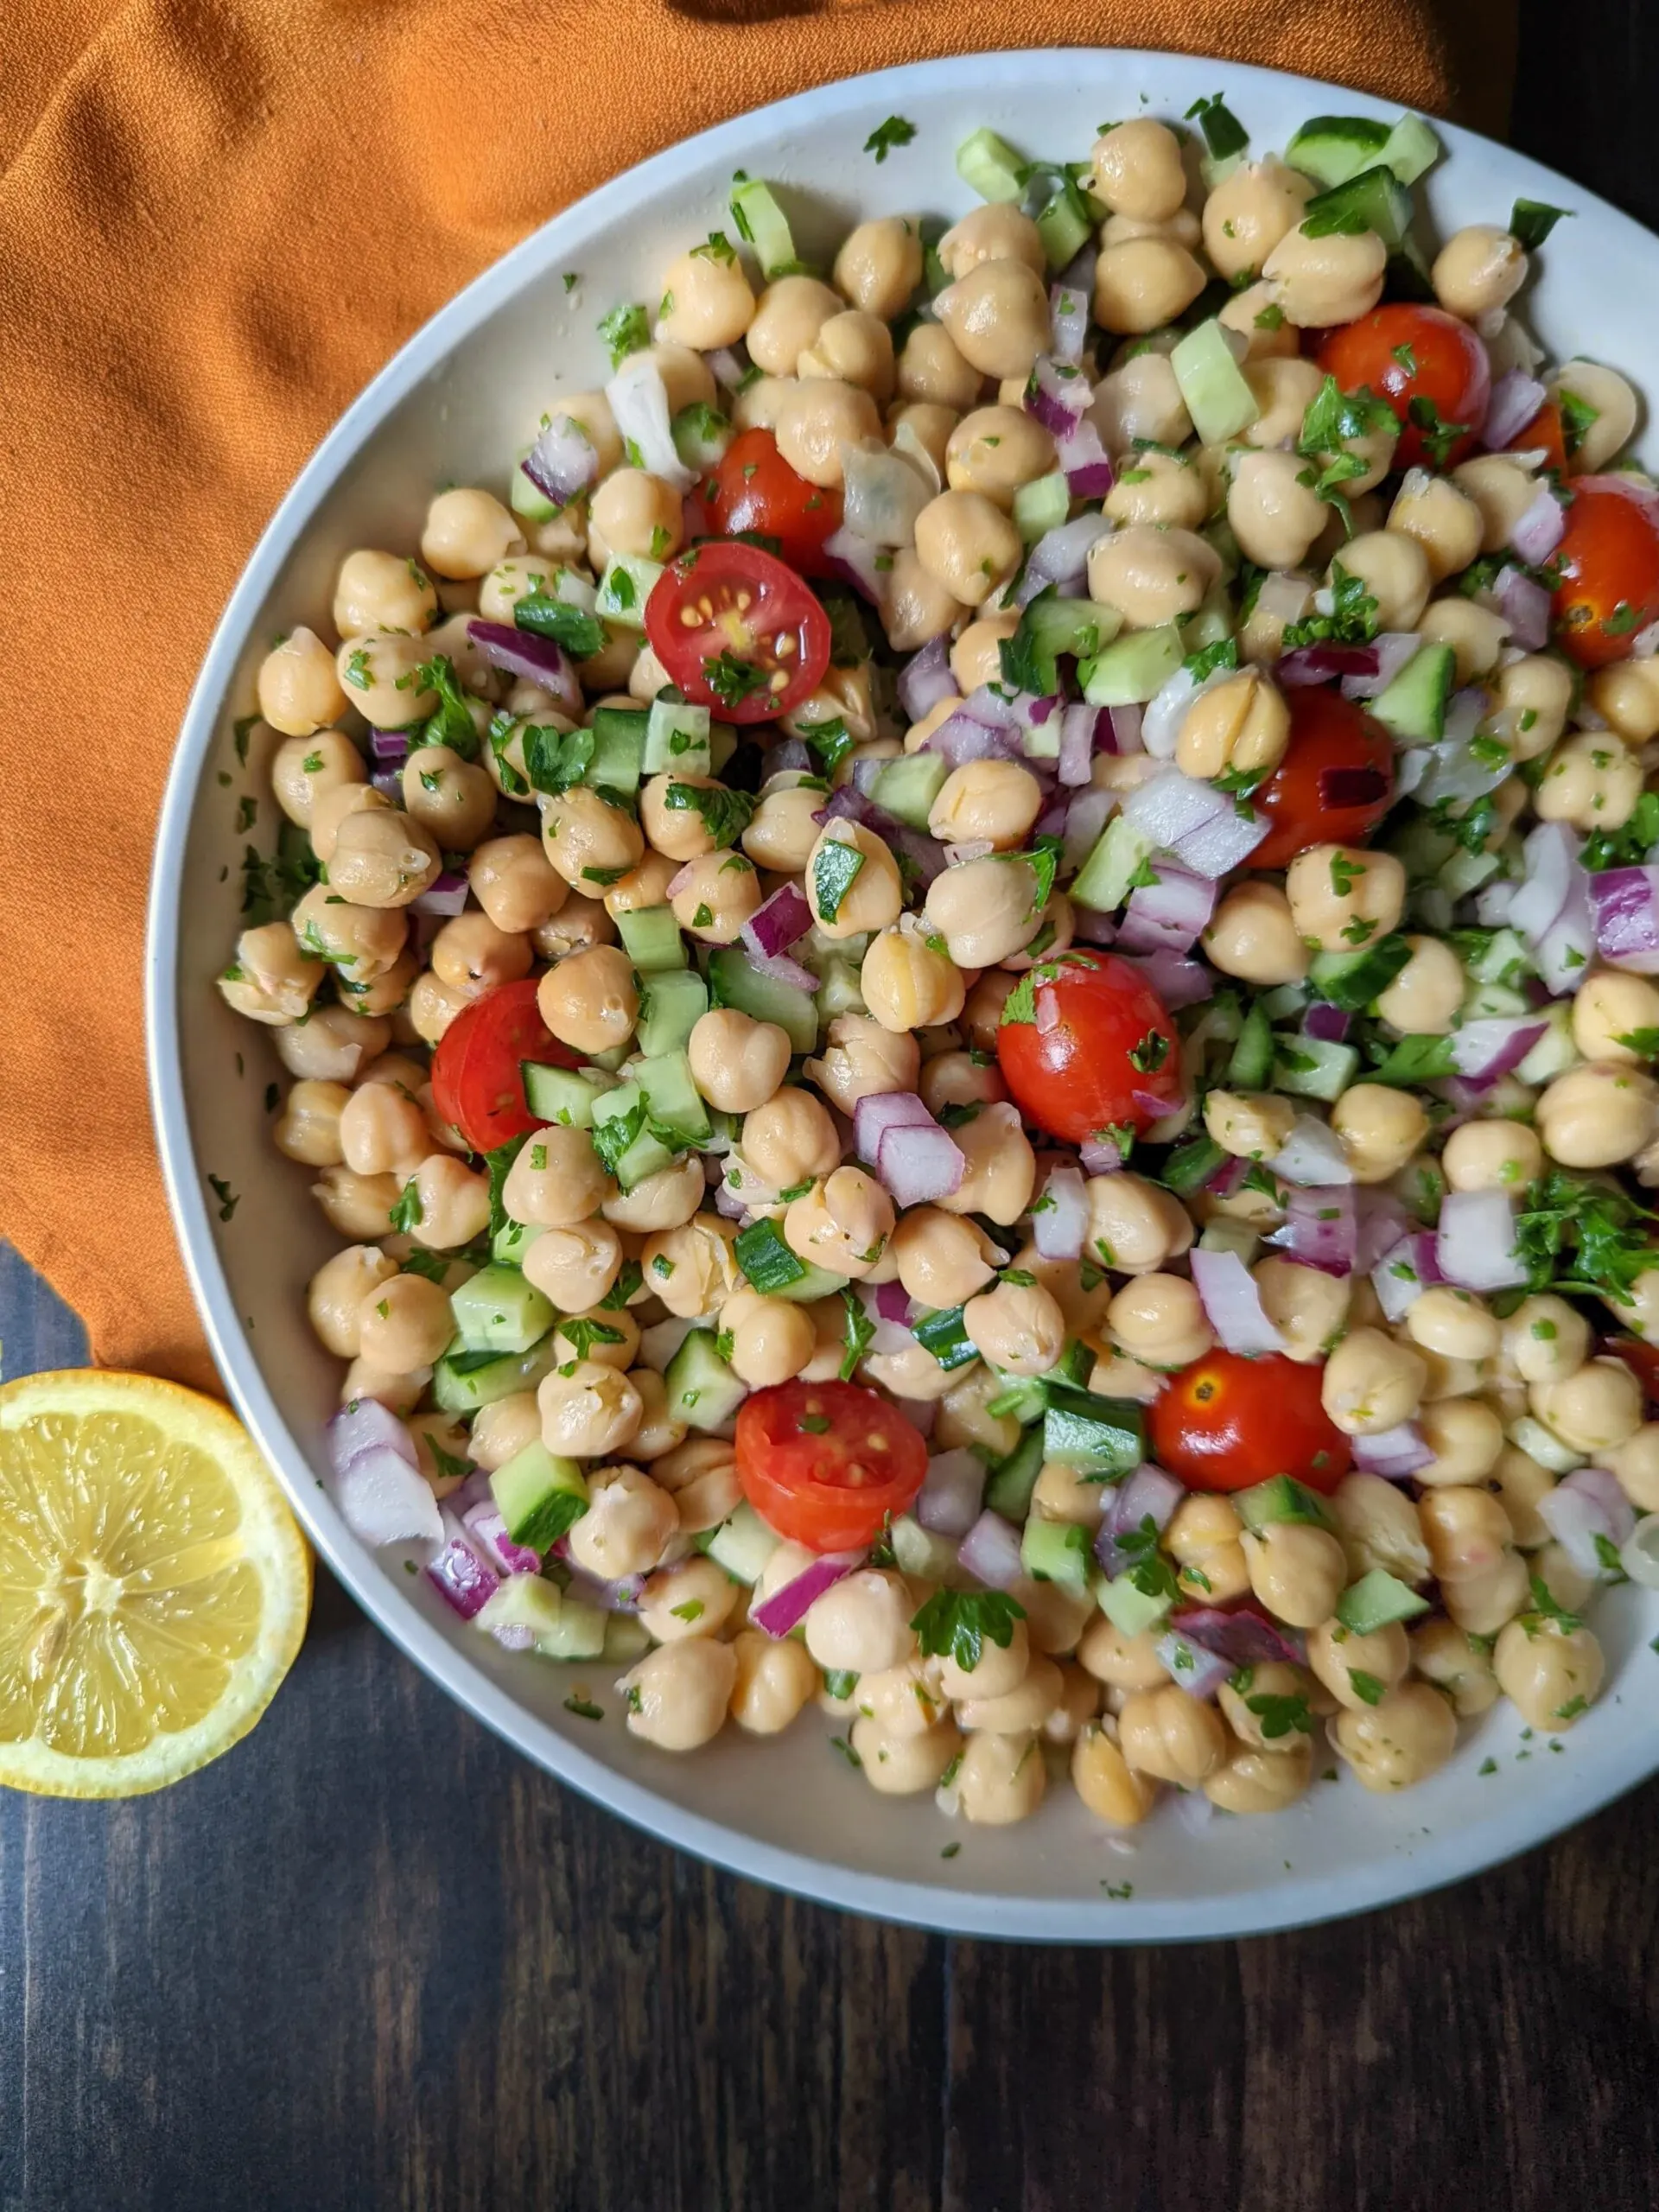 Chickpeas salad in a serving dish ready to eat.